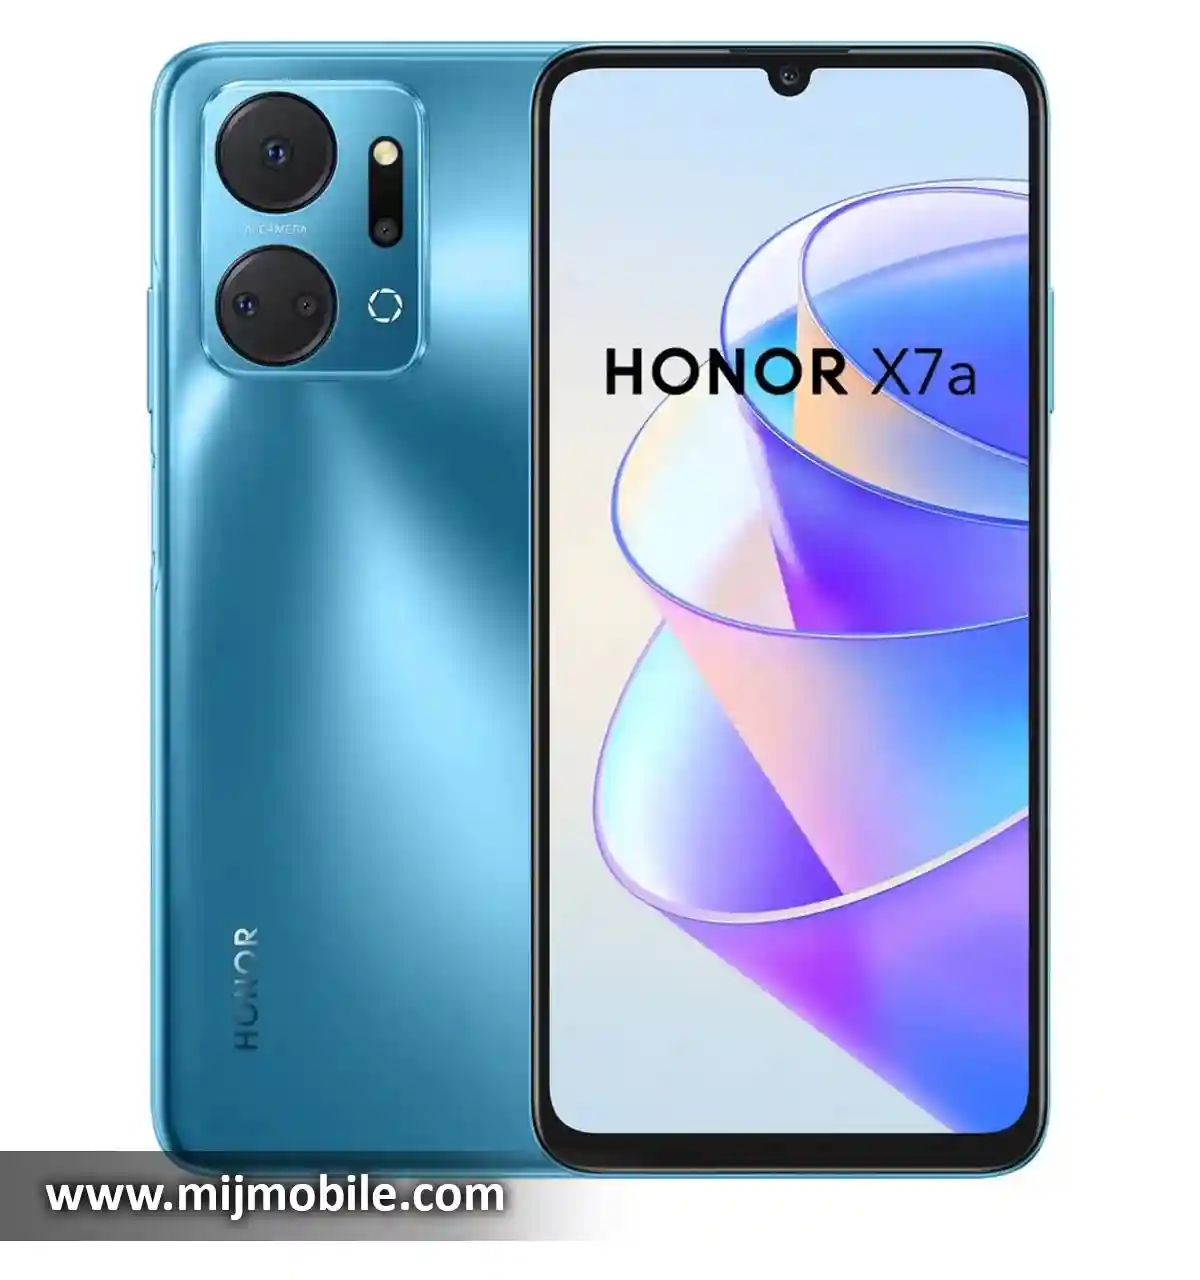 Honor X7a Price in Pakistan